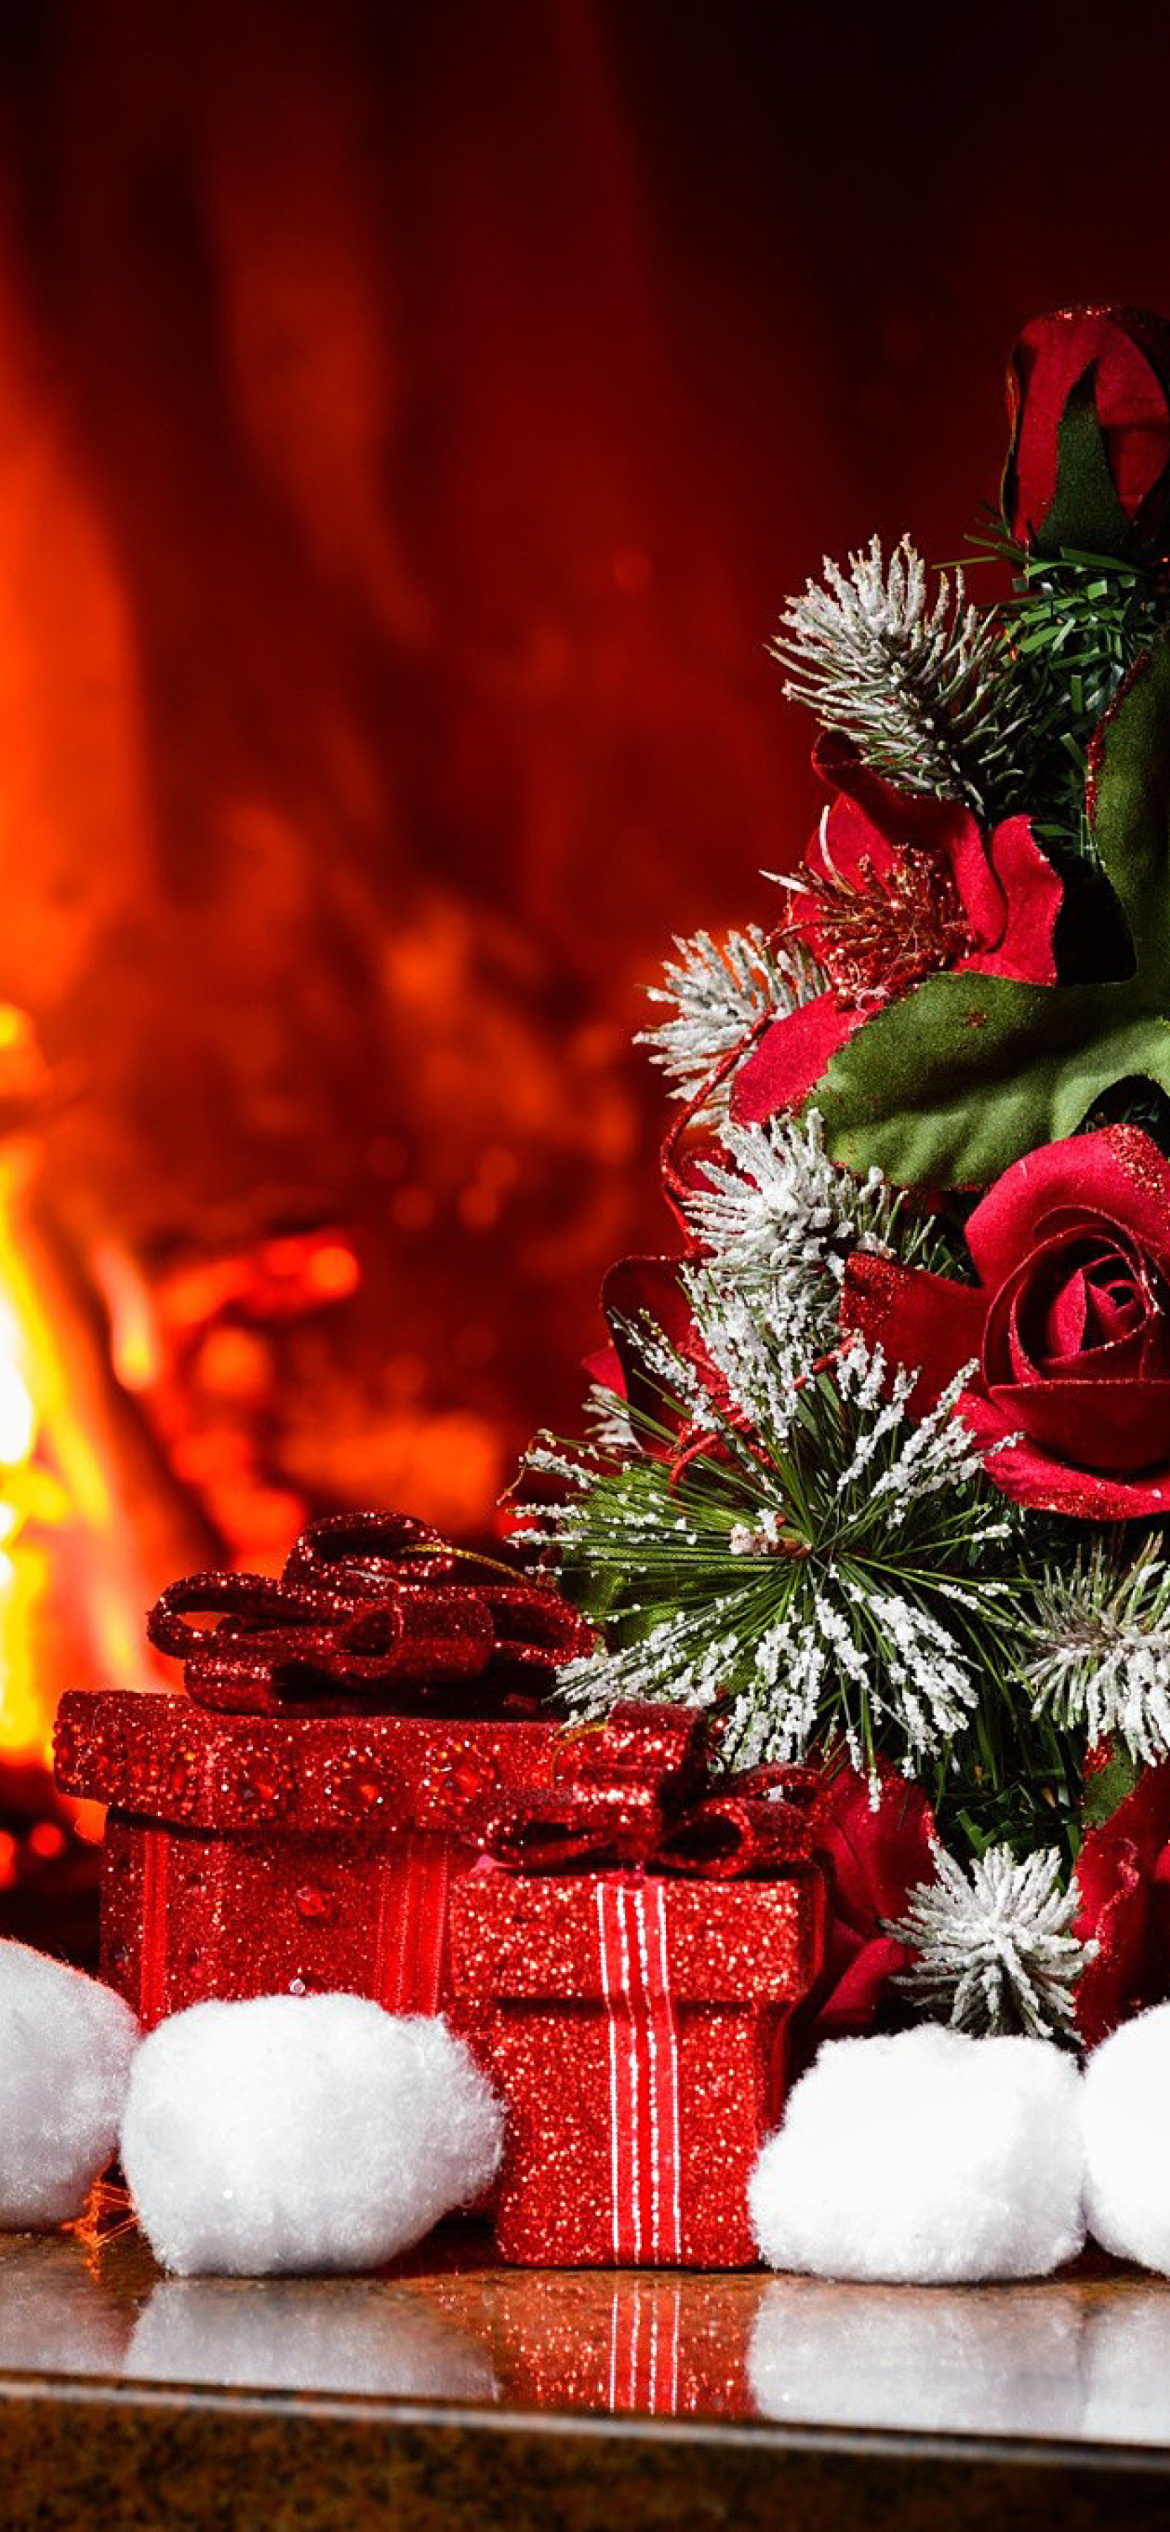 Christmas near Fireplace Wallpaper for iPhone XR